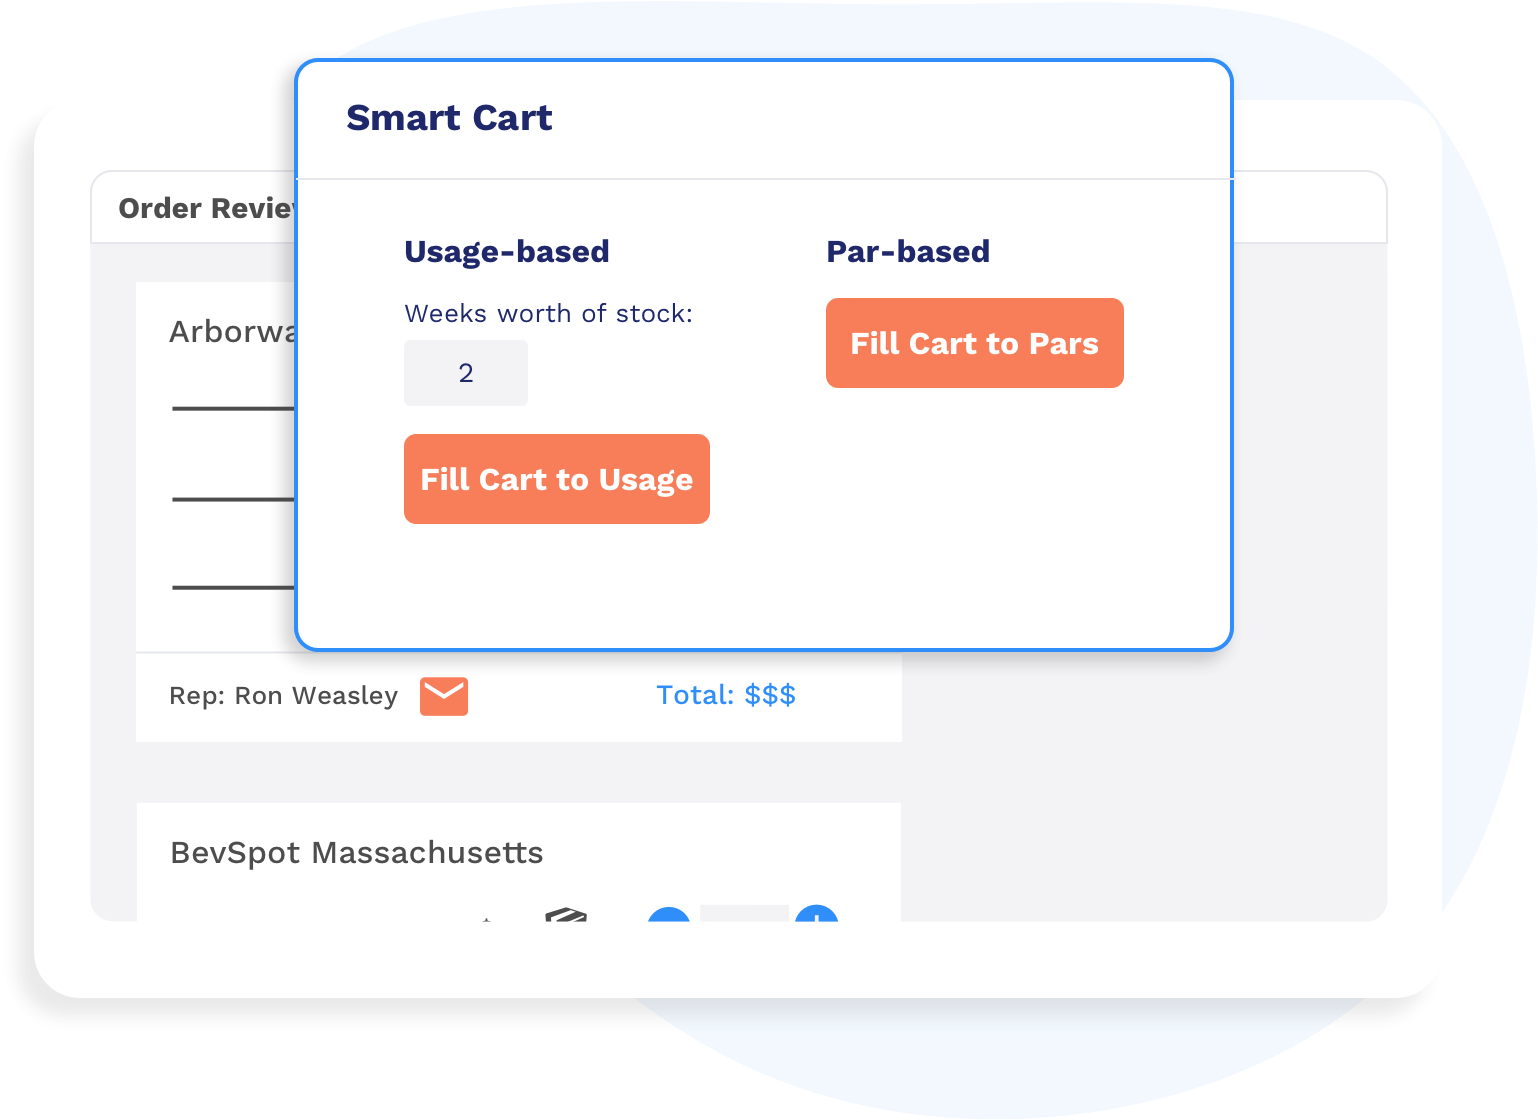 A mock-up of BevSpot's ordering flow highlighting the smart cart.